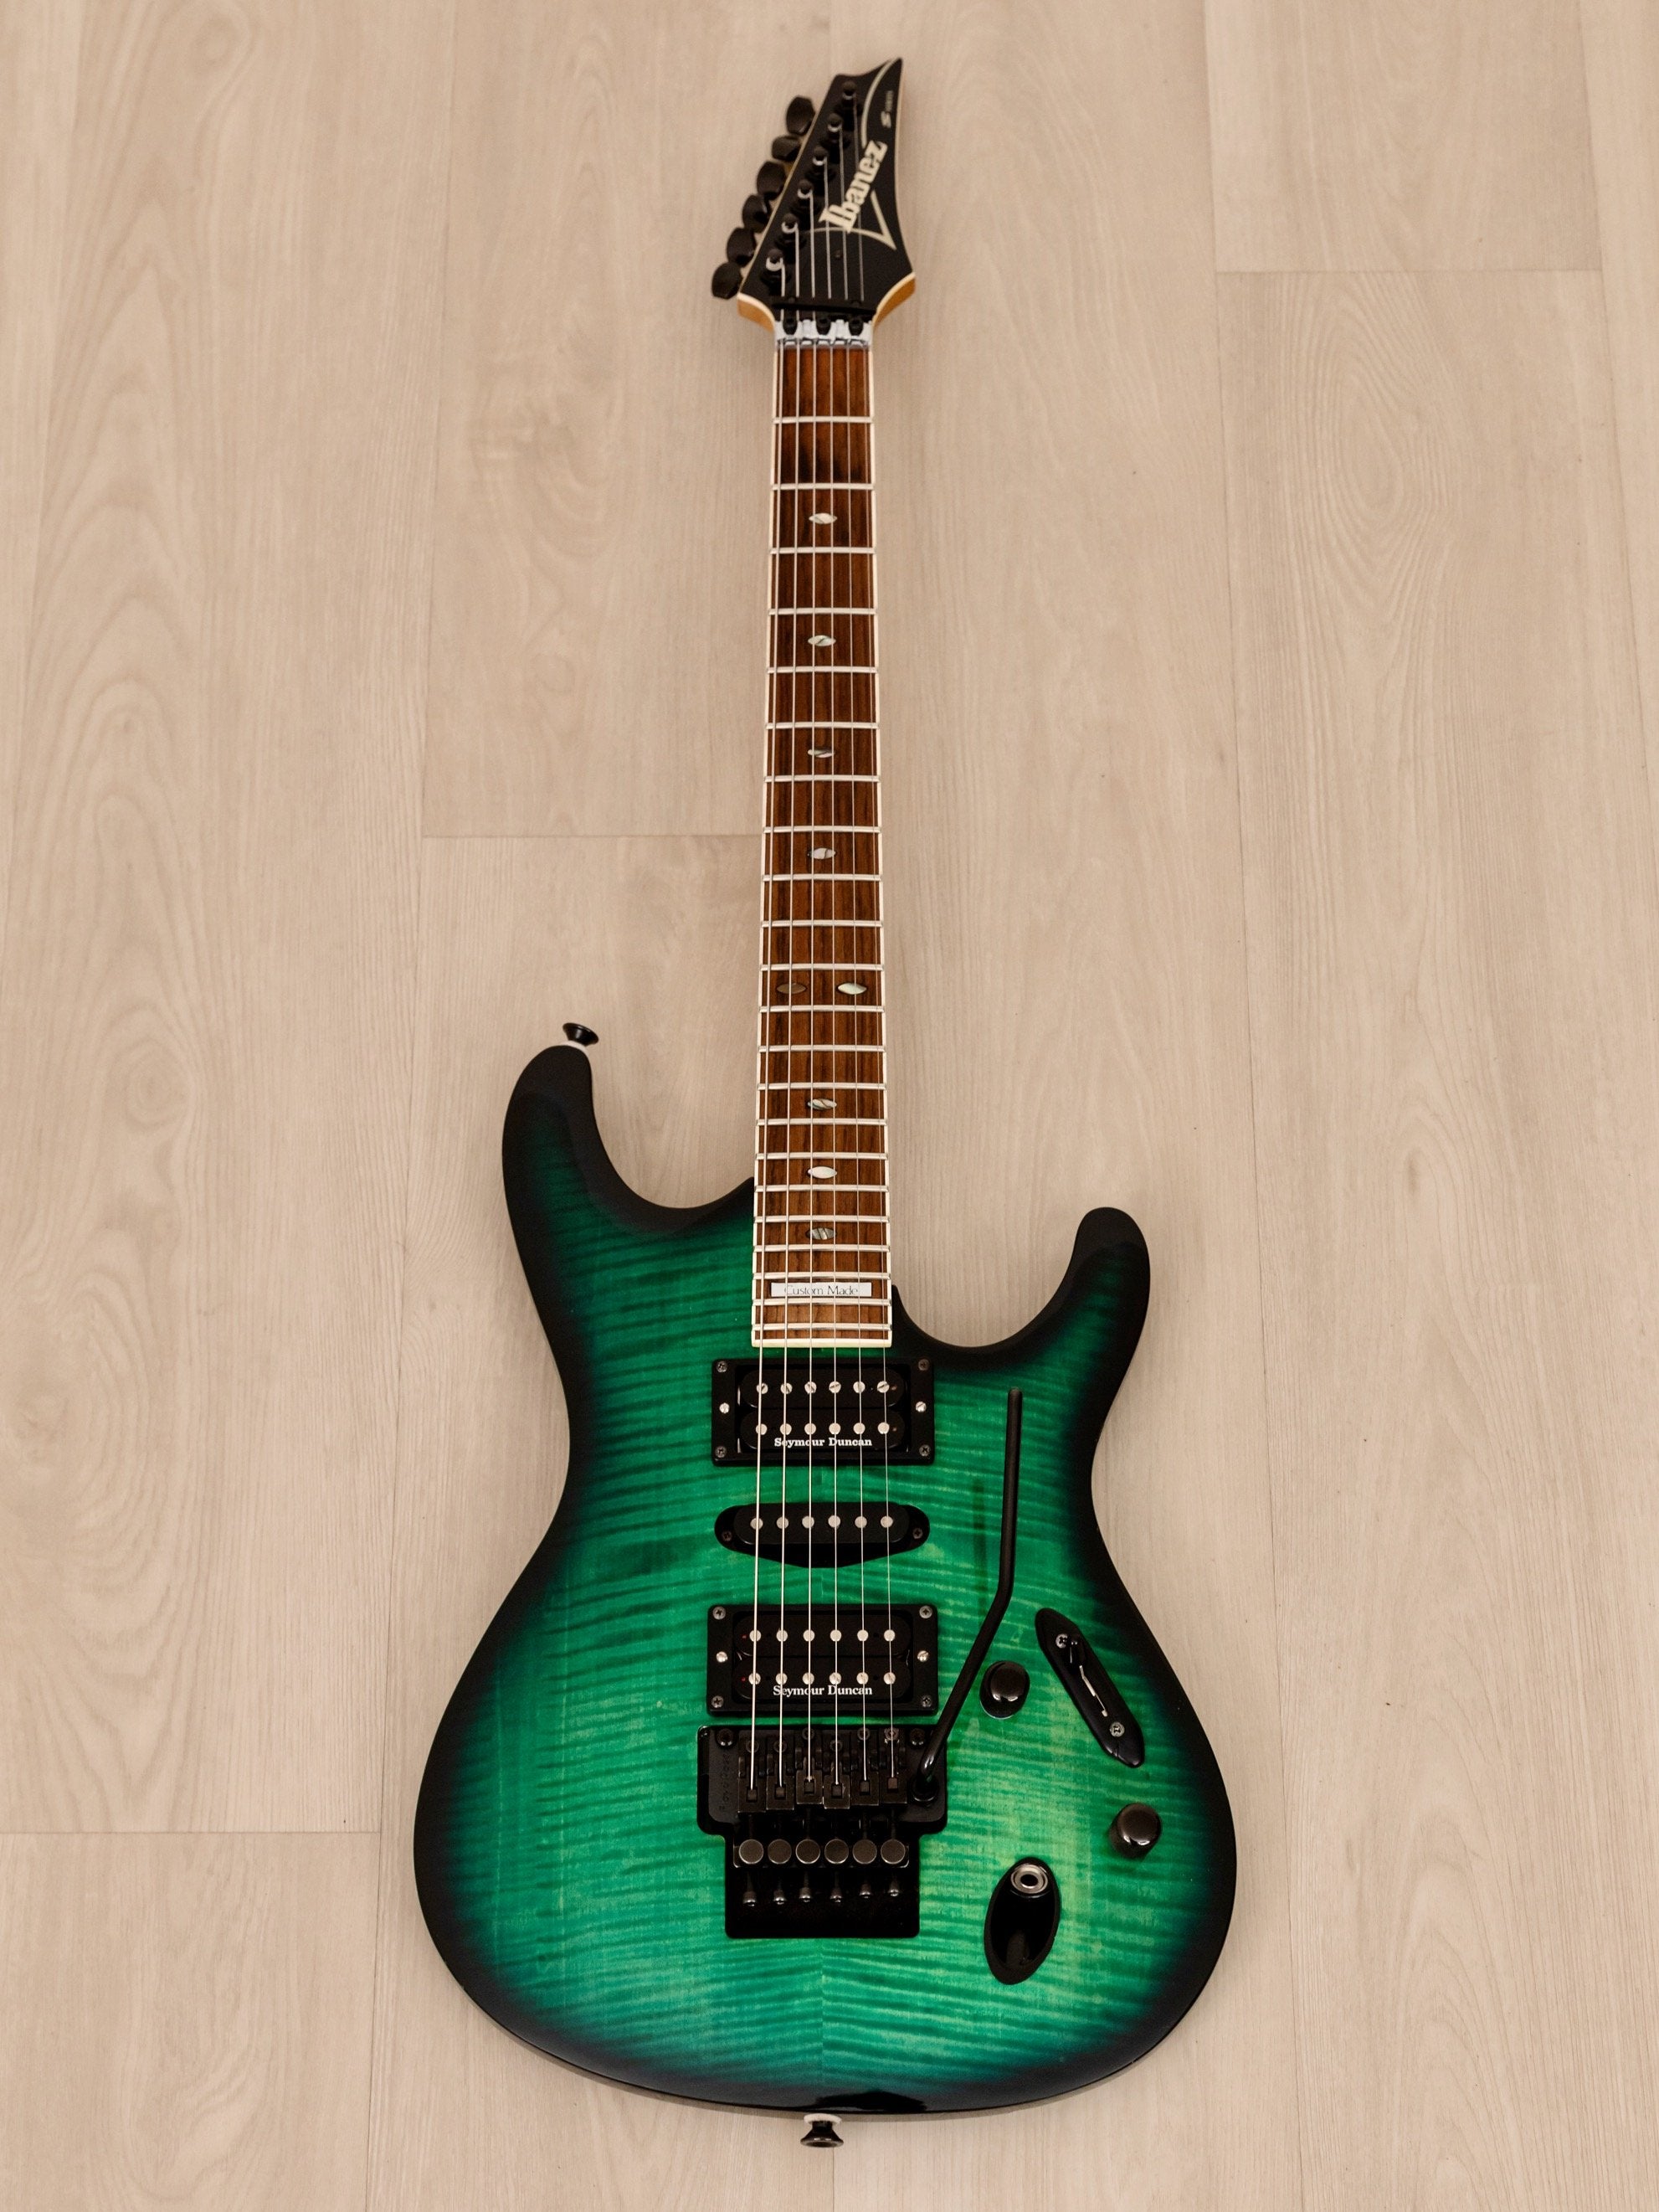 1995 Ibanez S540FM S Series Electric Guitar HSH Transparent Turquoise w/ USA Seymour Duncans & Floyd Rose, Japan